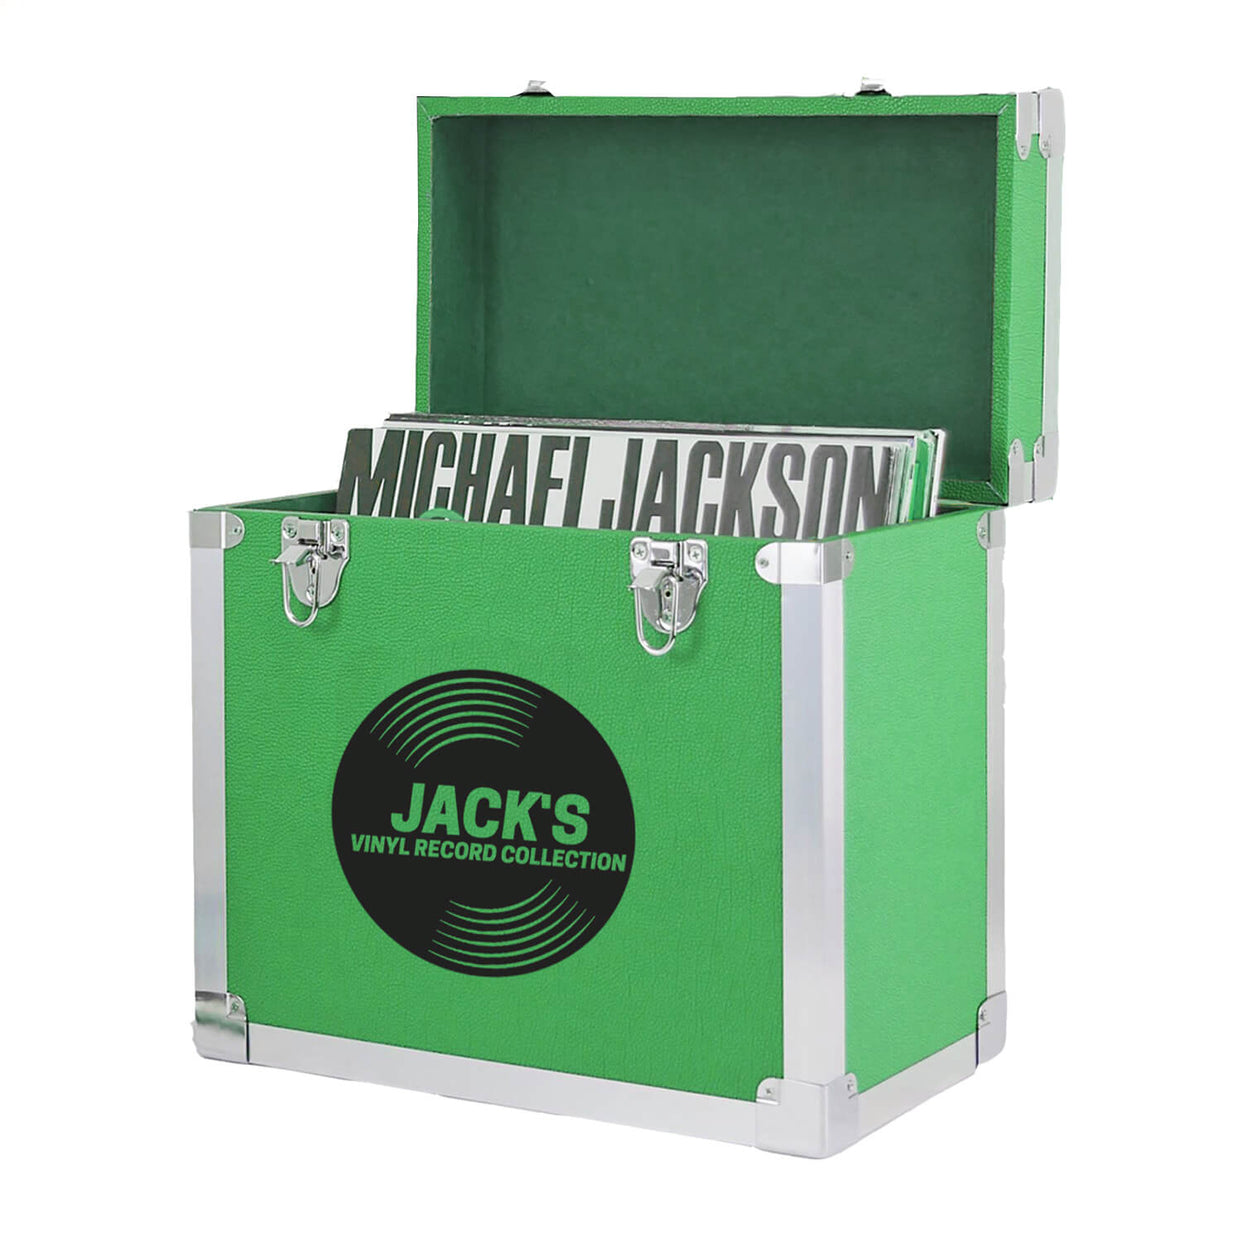 Personalised Music Record Vinyl Storage Box - 12 inch - Green Vinyl - Stores up to 50 records